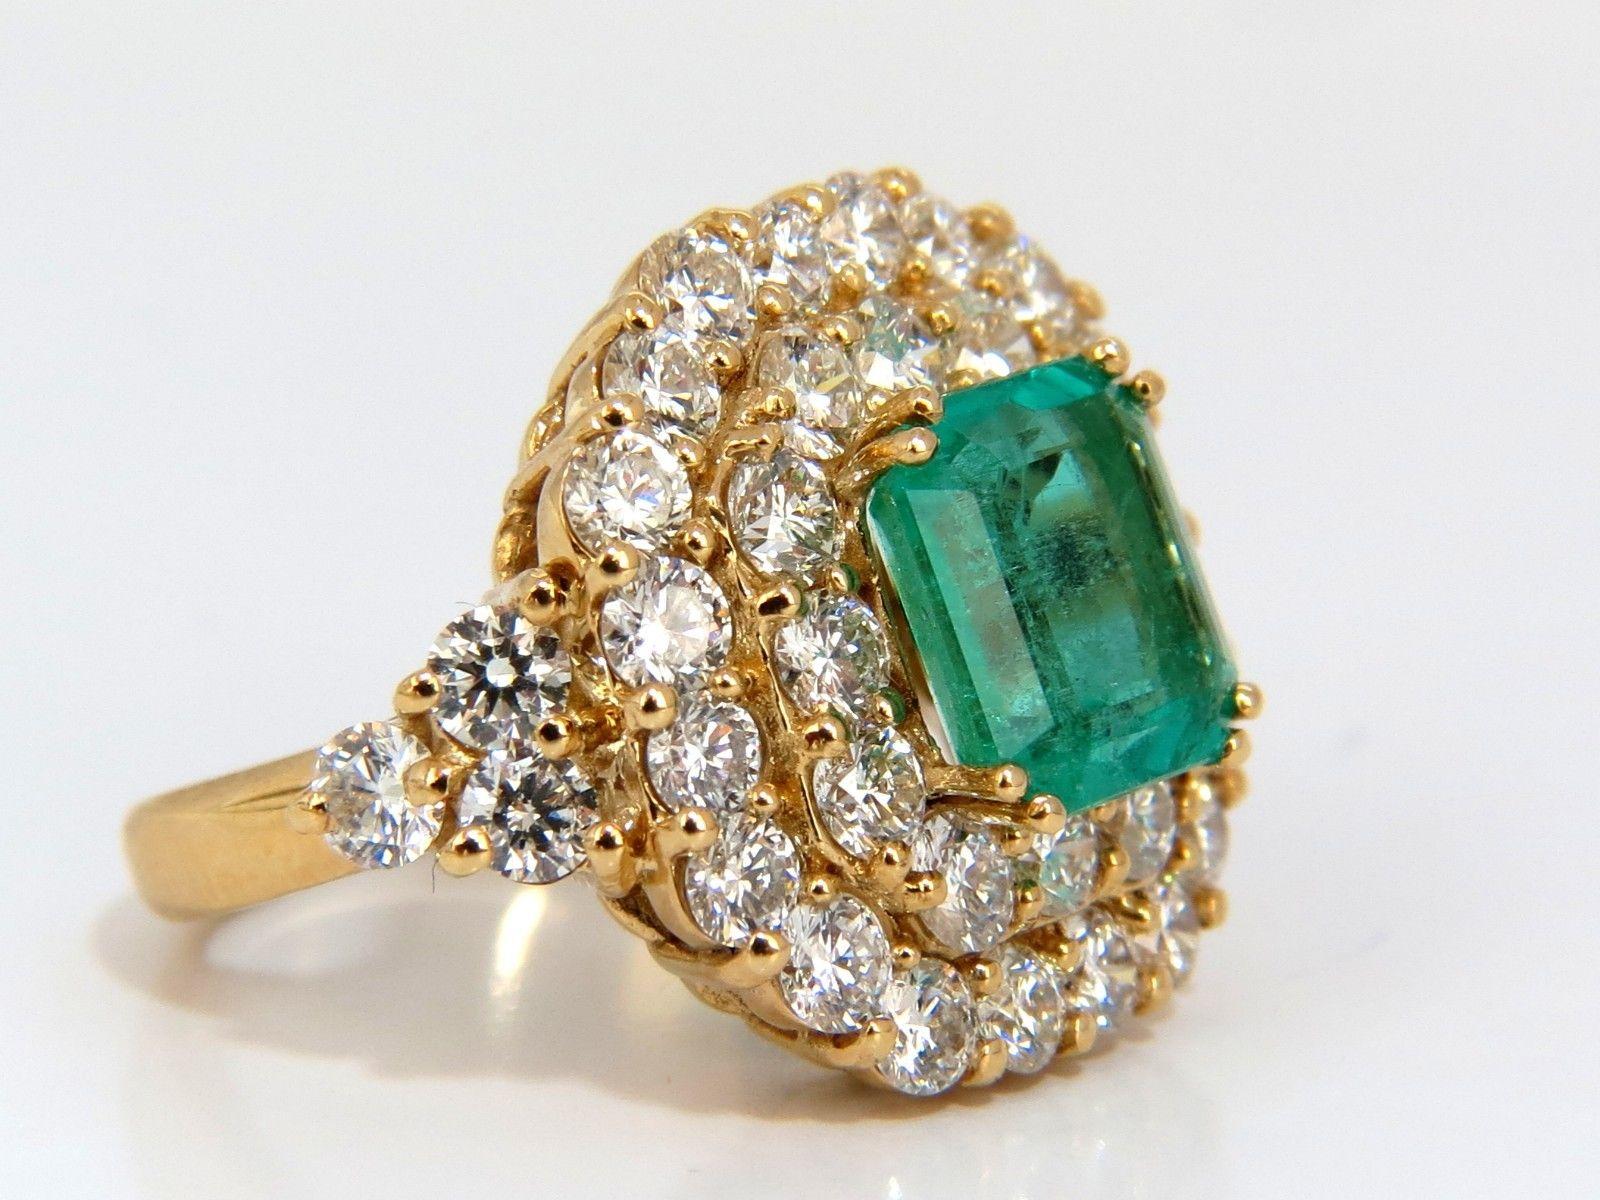 GIA 7.51 Natural Colombia Bright Green Emerald Diamonds Ring 18 Karat For Sale 3